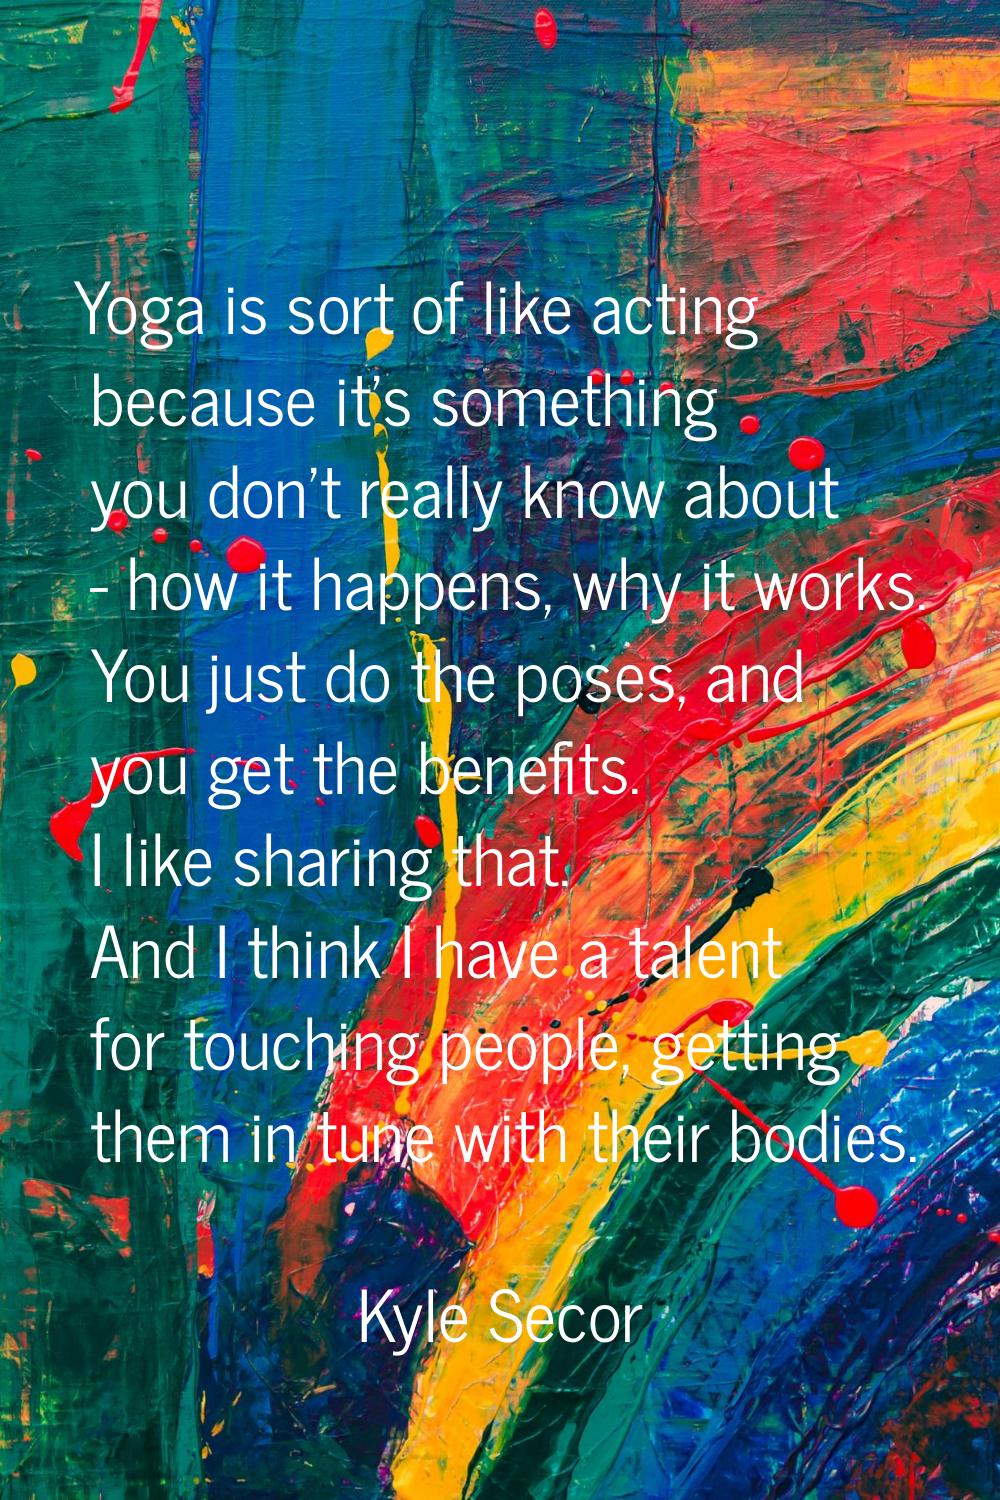 Yoga is sort of like acting because it's something you don't really know about - how it happens, wh